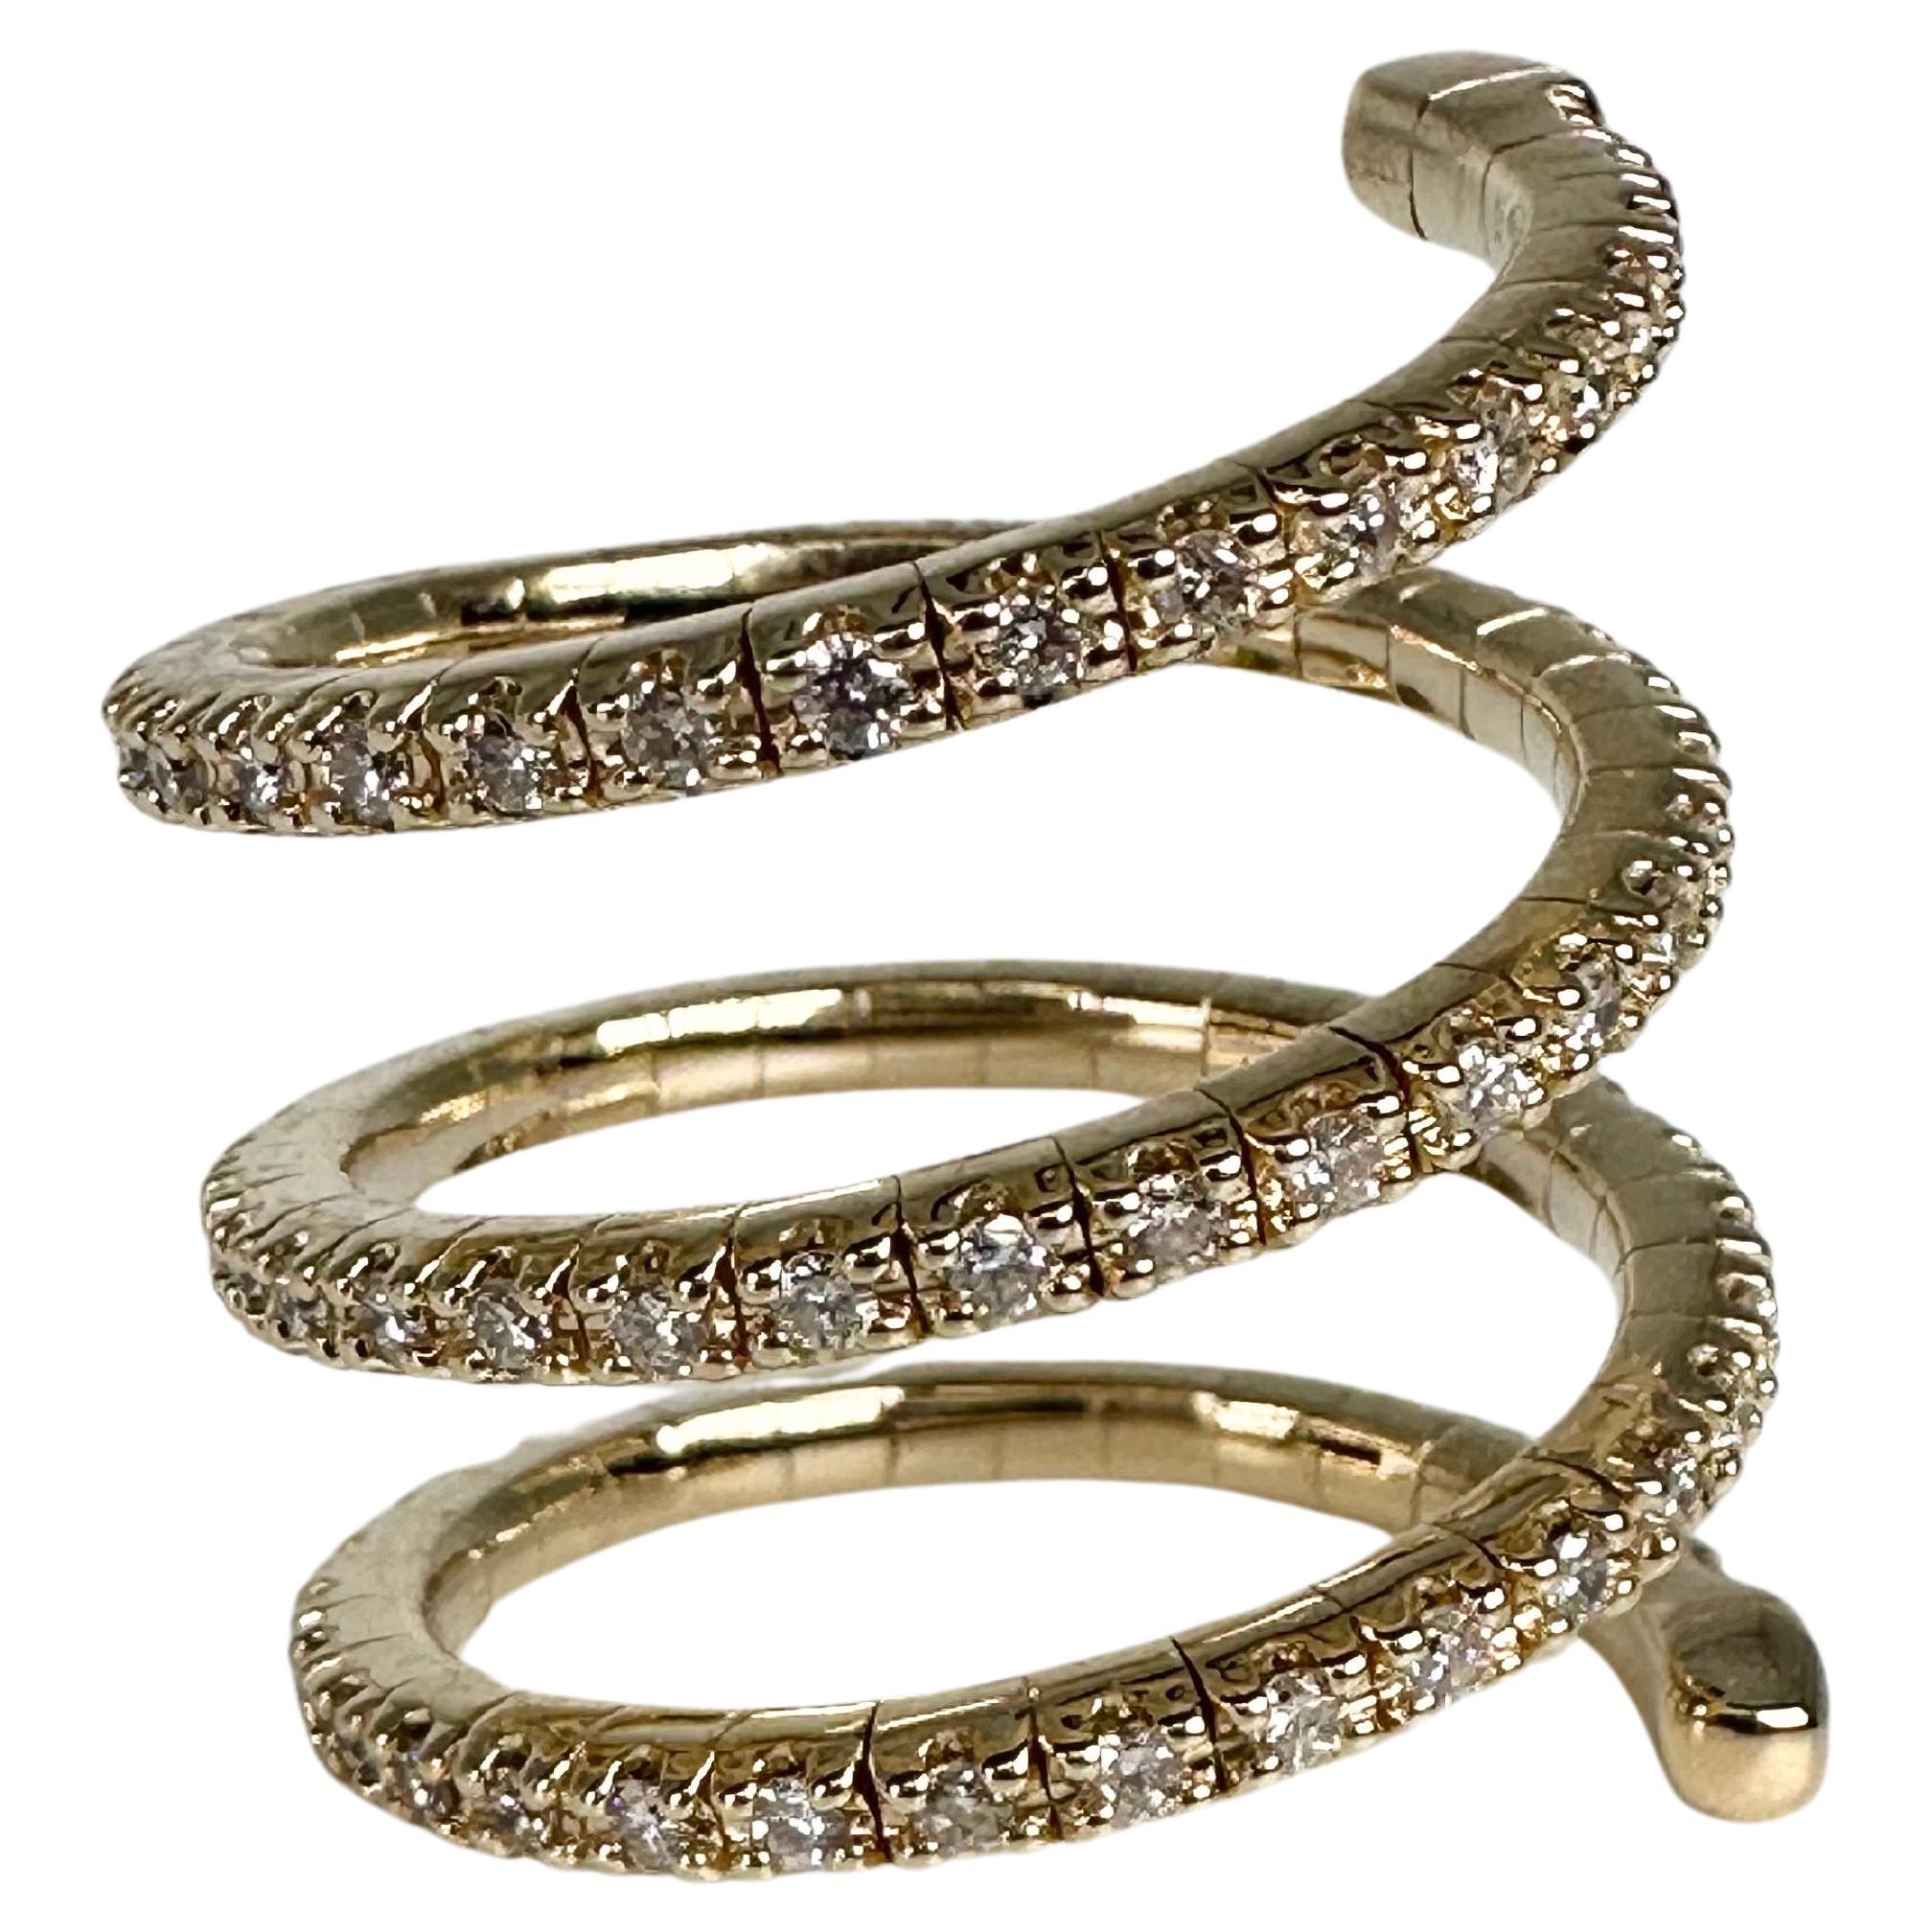 Rare flexible diamond ring fits all sizes spiral ring 14KT gold 